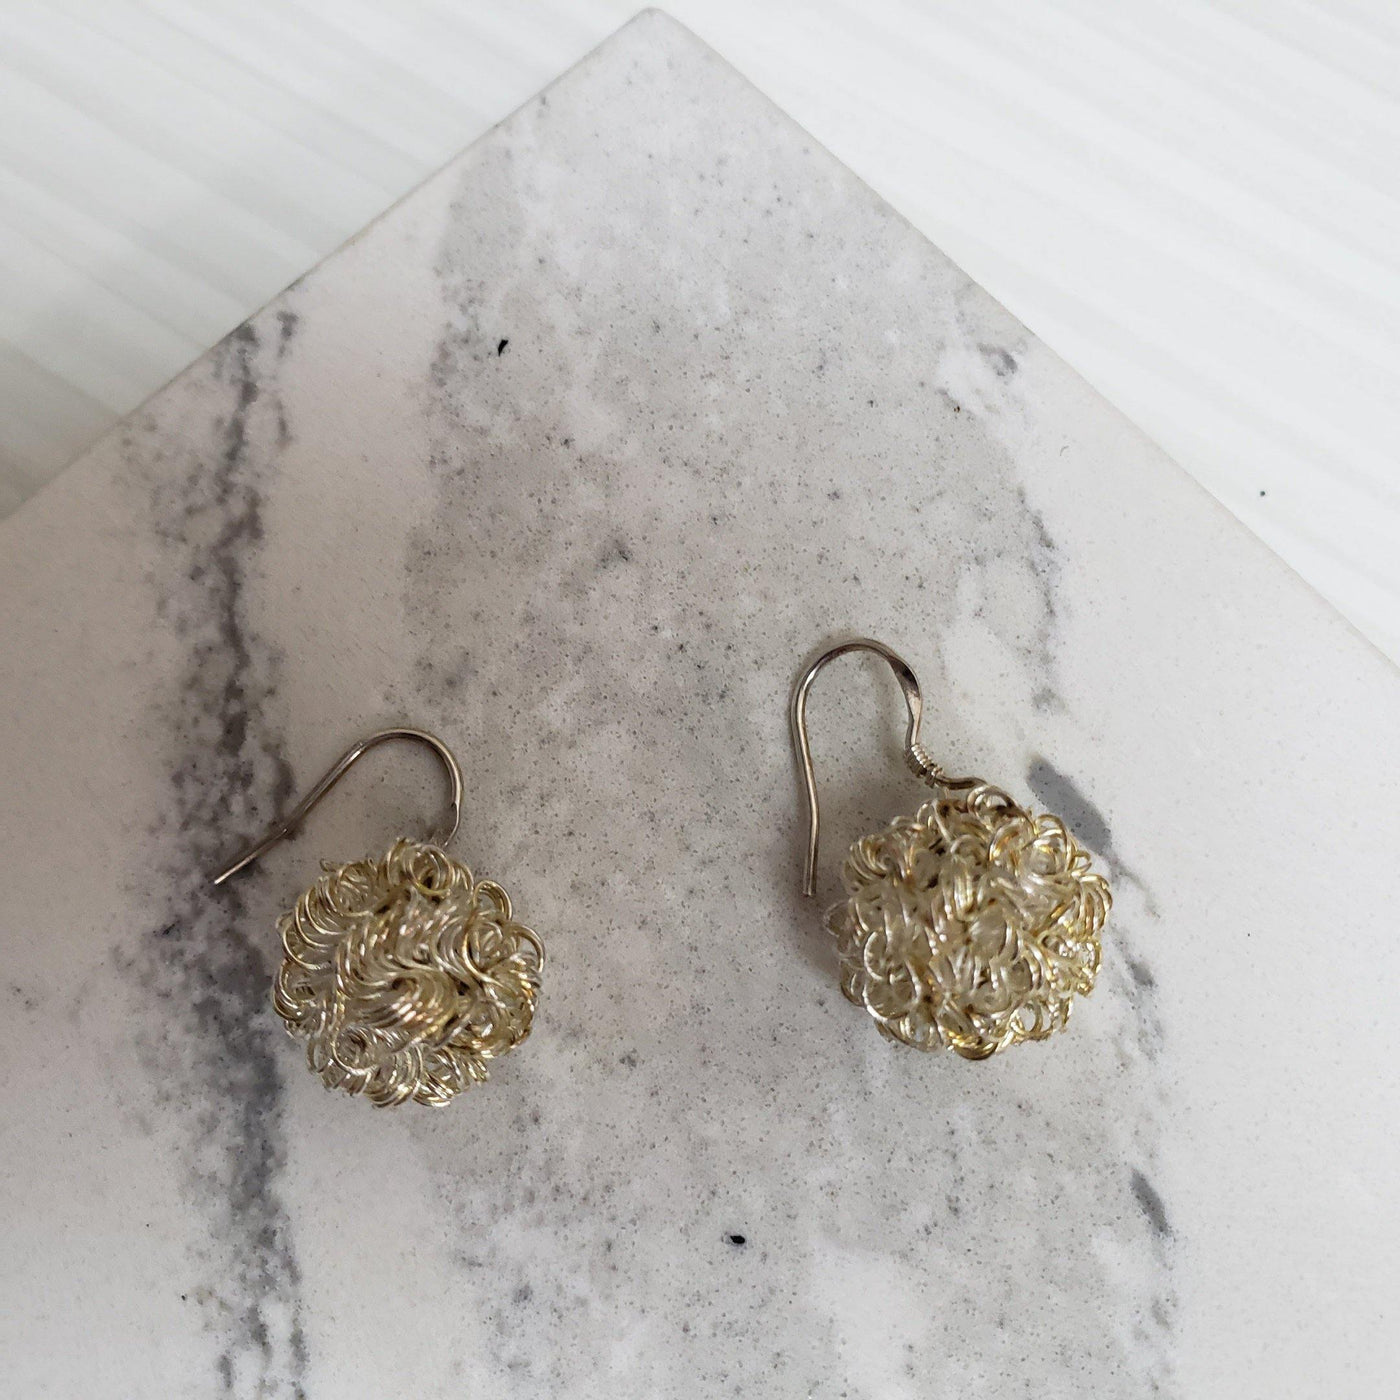 Squiggle silver ball earrings - LB Designs